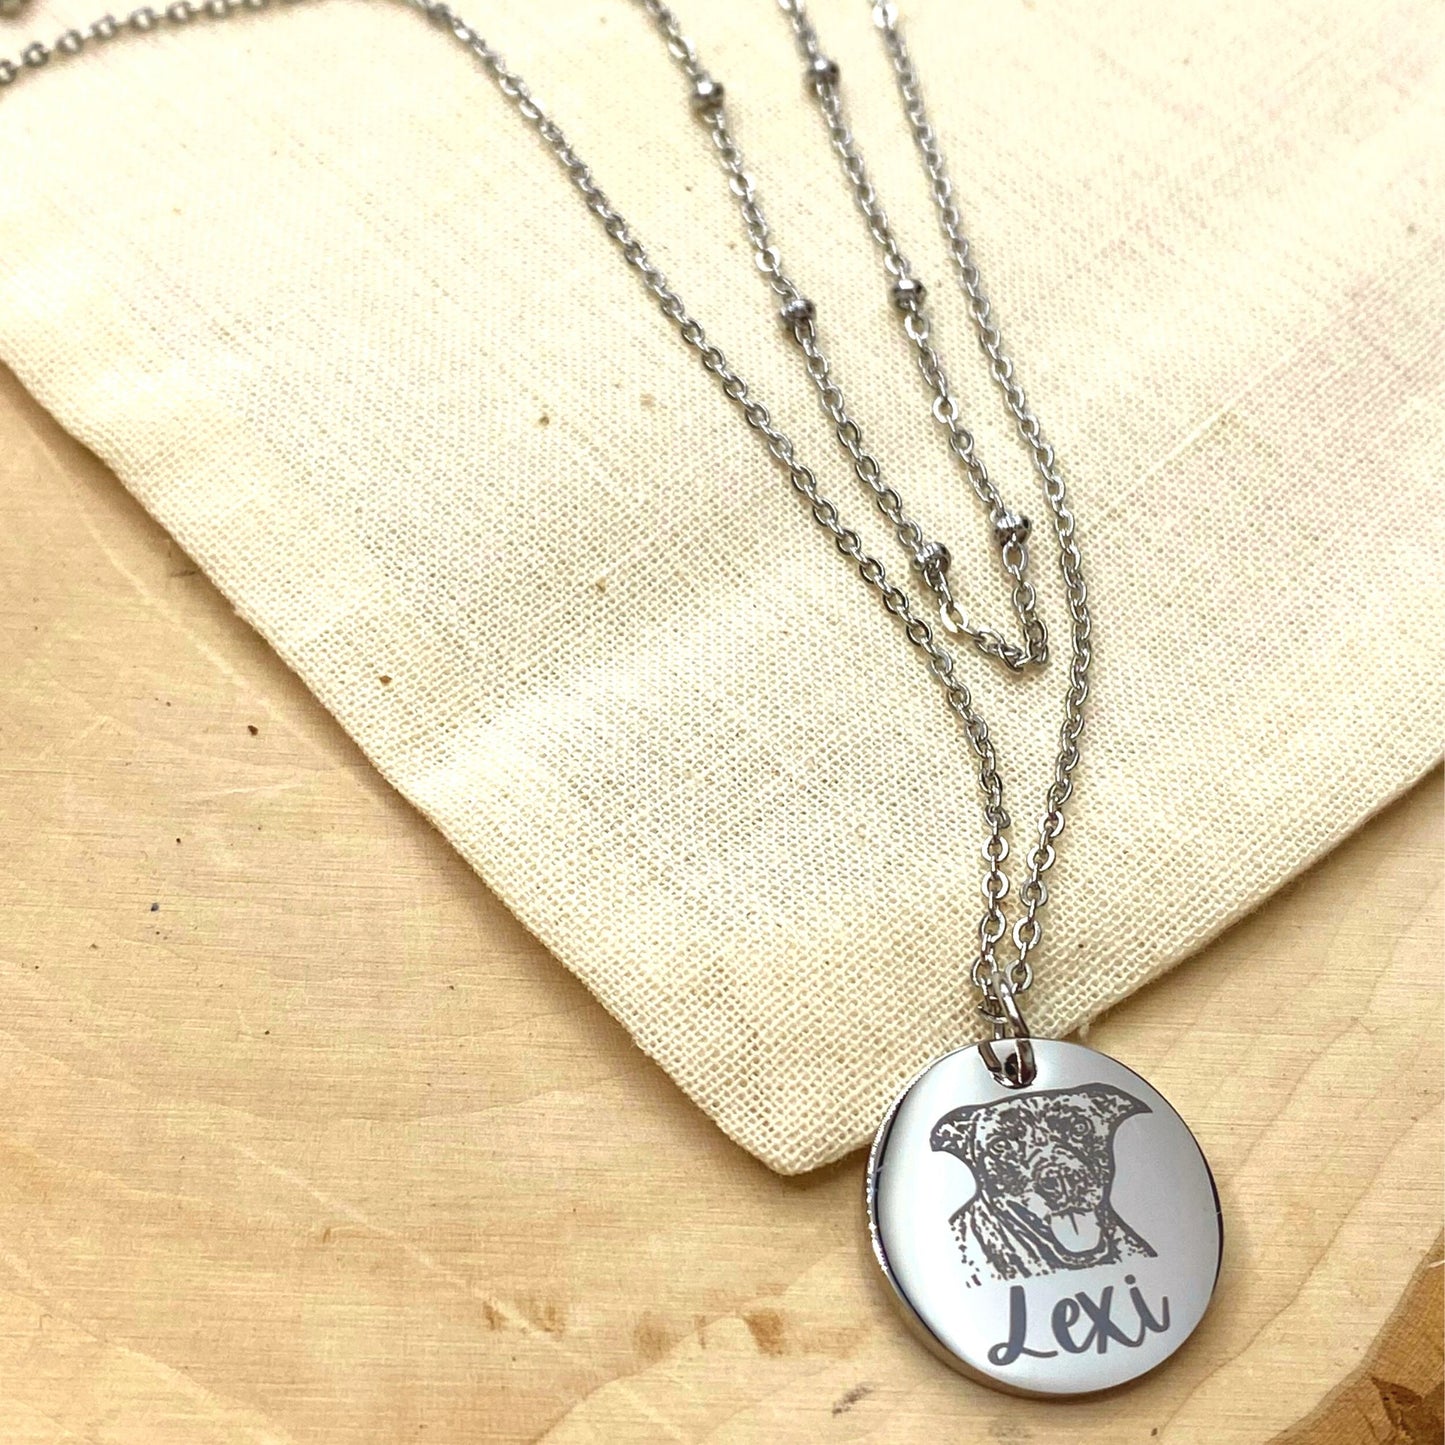 Necklace - Engraved Necklace with Engraved Pet's Face (Gold)